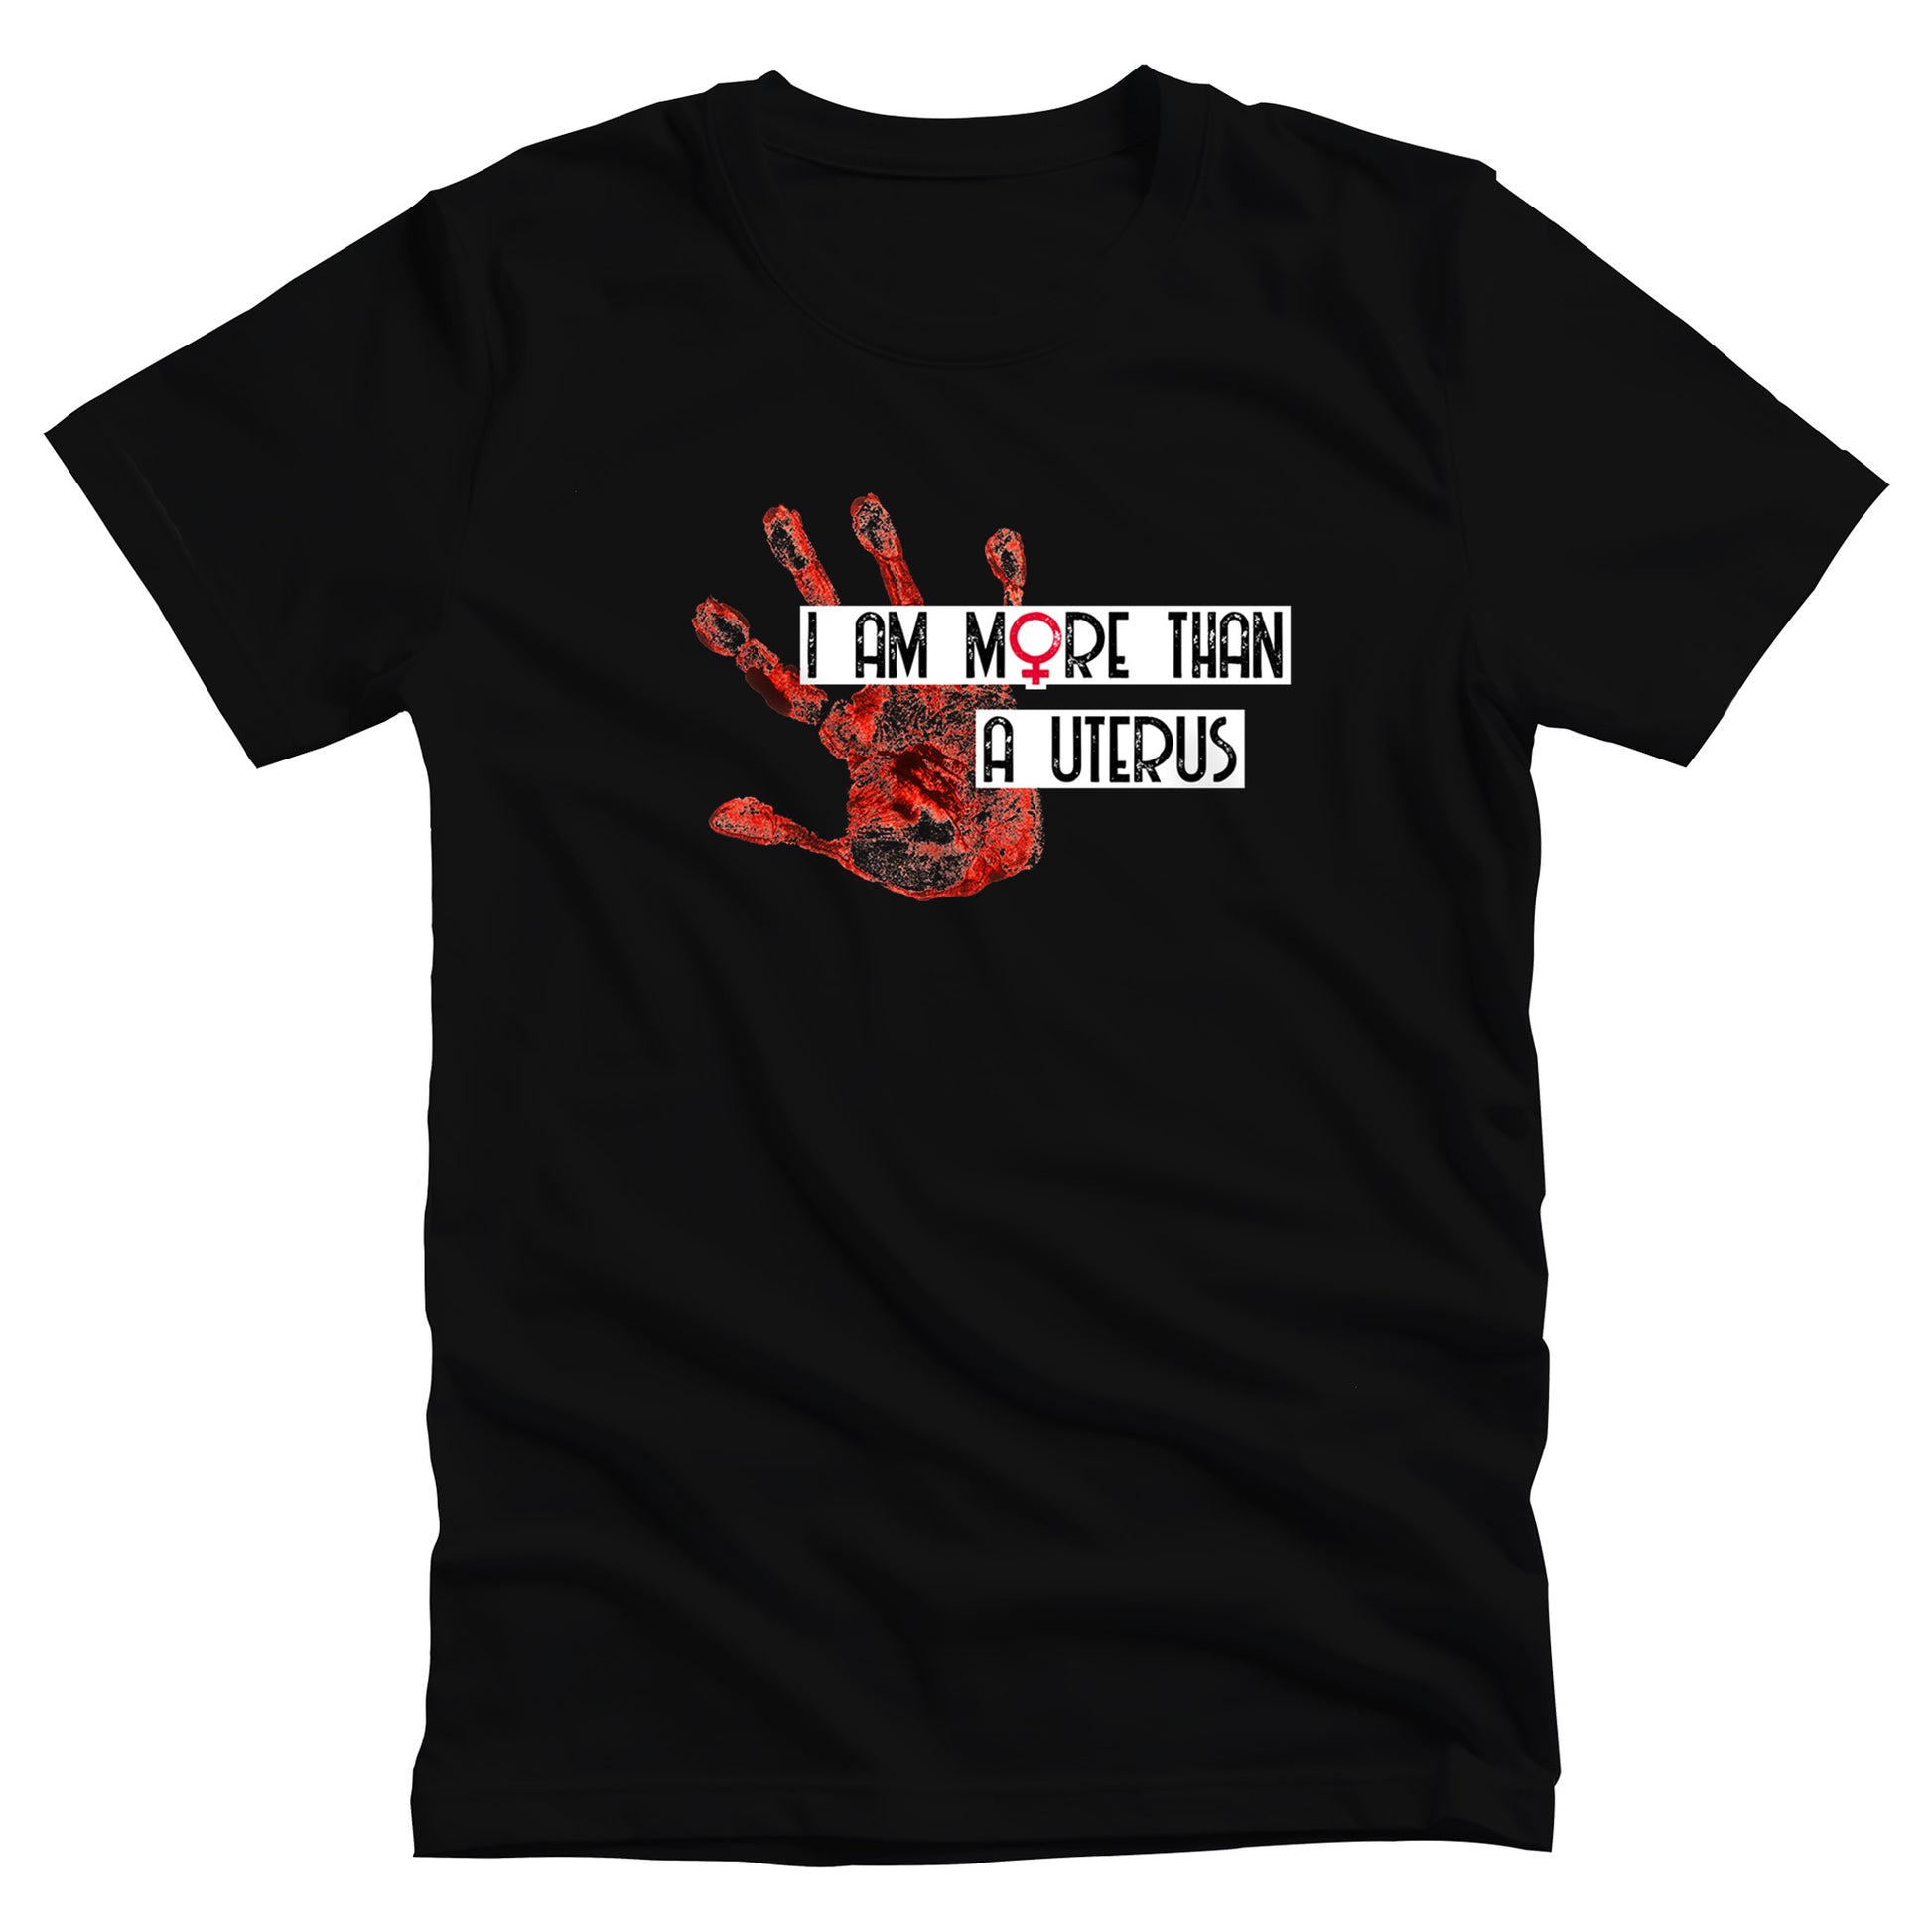 Black unisex t-shirt that says, “I Am More Than a Uterus” in all caps. “I Am More Than” is on one line and “a Uterus” is on a separate line. The text all has a thin white rectangle behind it that expands the length of the text. To the left is a red handprint.